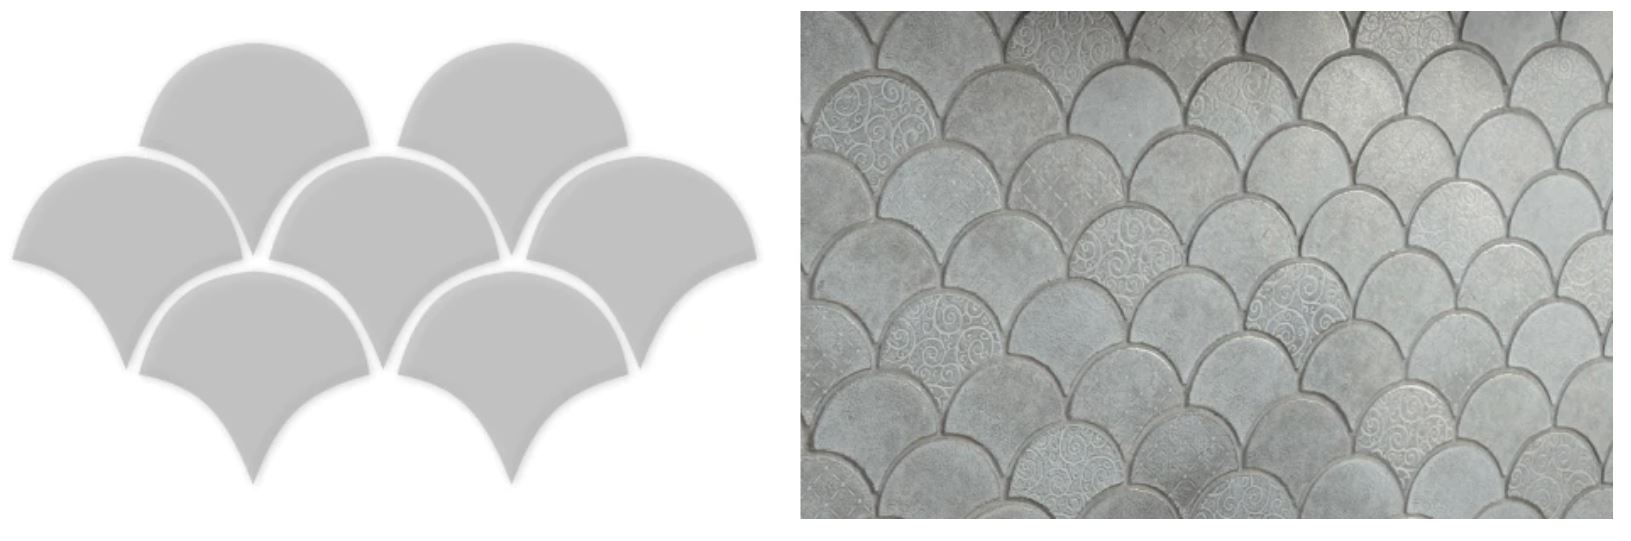 Illustration and a photo of fish scale decorative tile